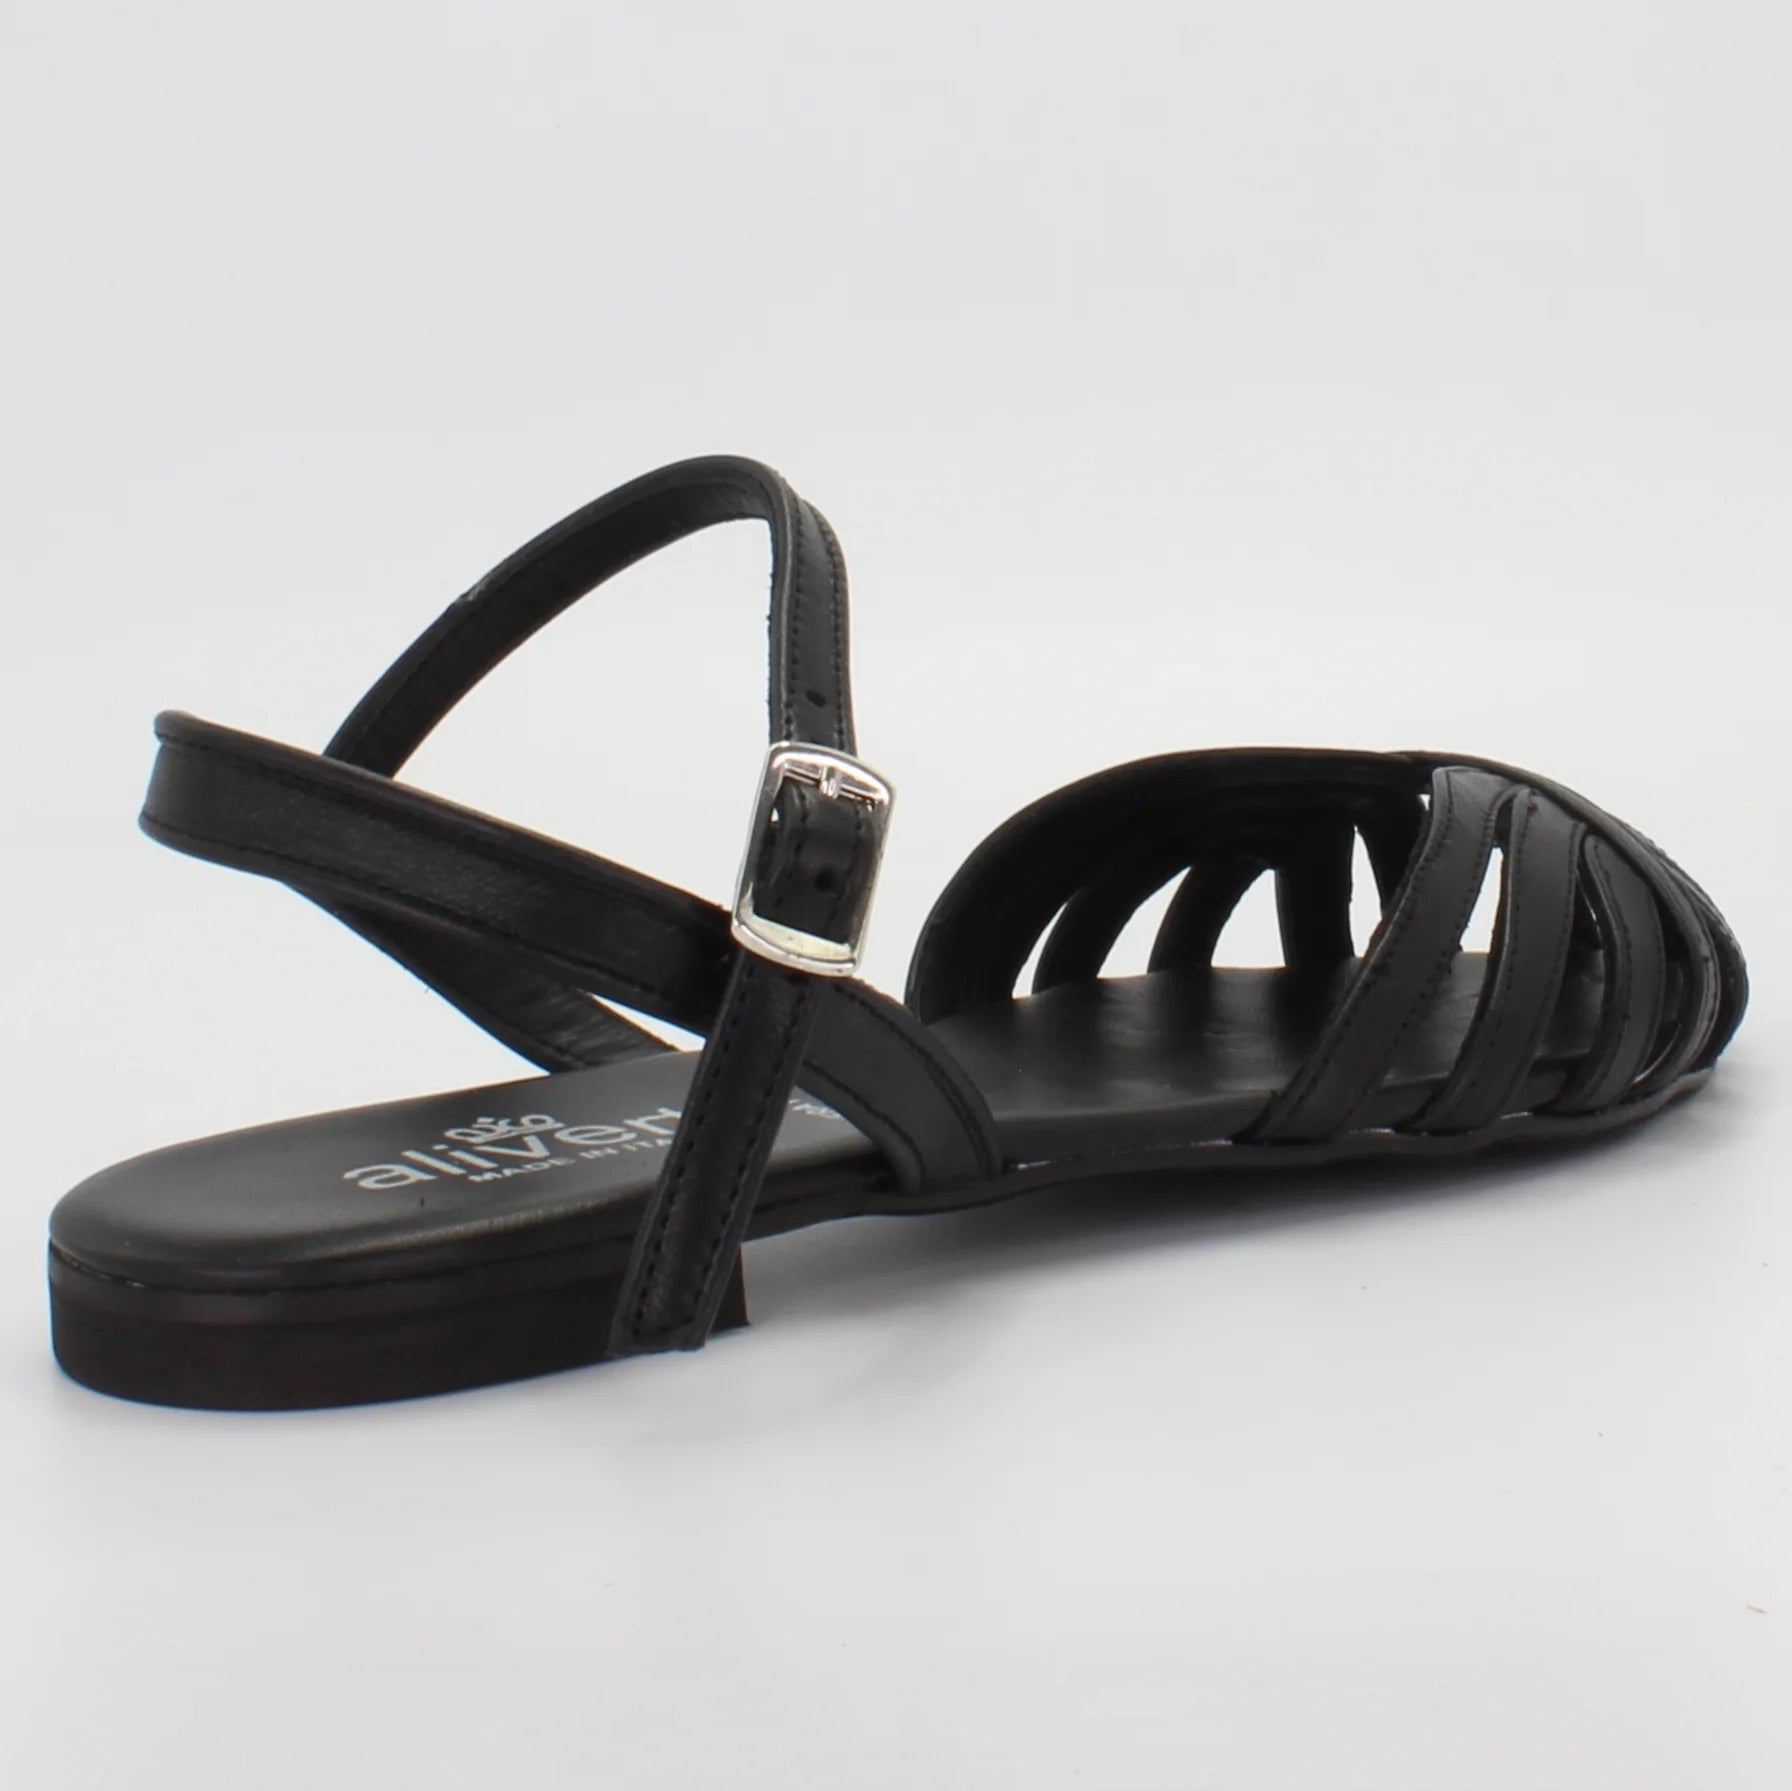 Shop Handmade Italian Leather sandal in nero (G500) or browse our range of hand-made Italian shoes in leather or suede in-store at Aliverti Cape Town, or shop online. We deliver in South Africa & offer multiple payment plans as well as accept multiple safe & secure payment methods.